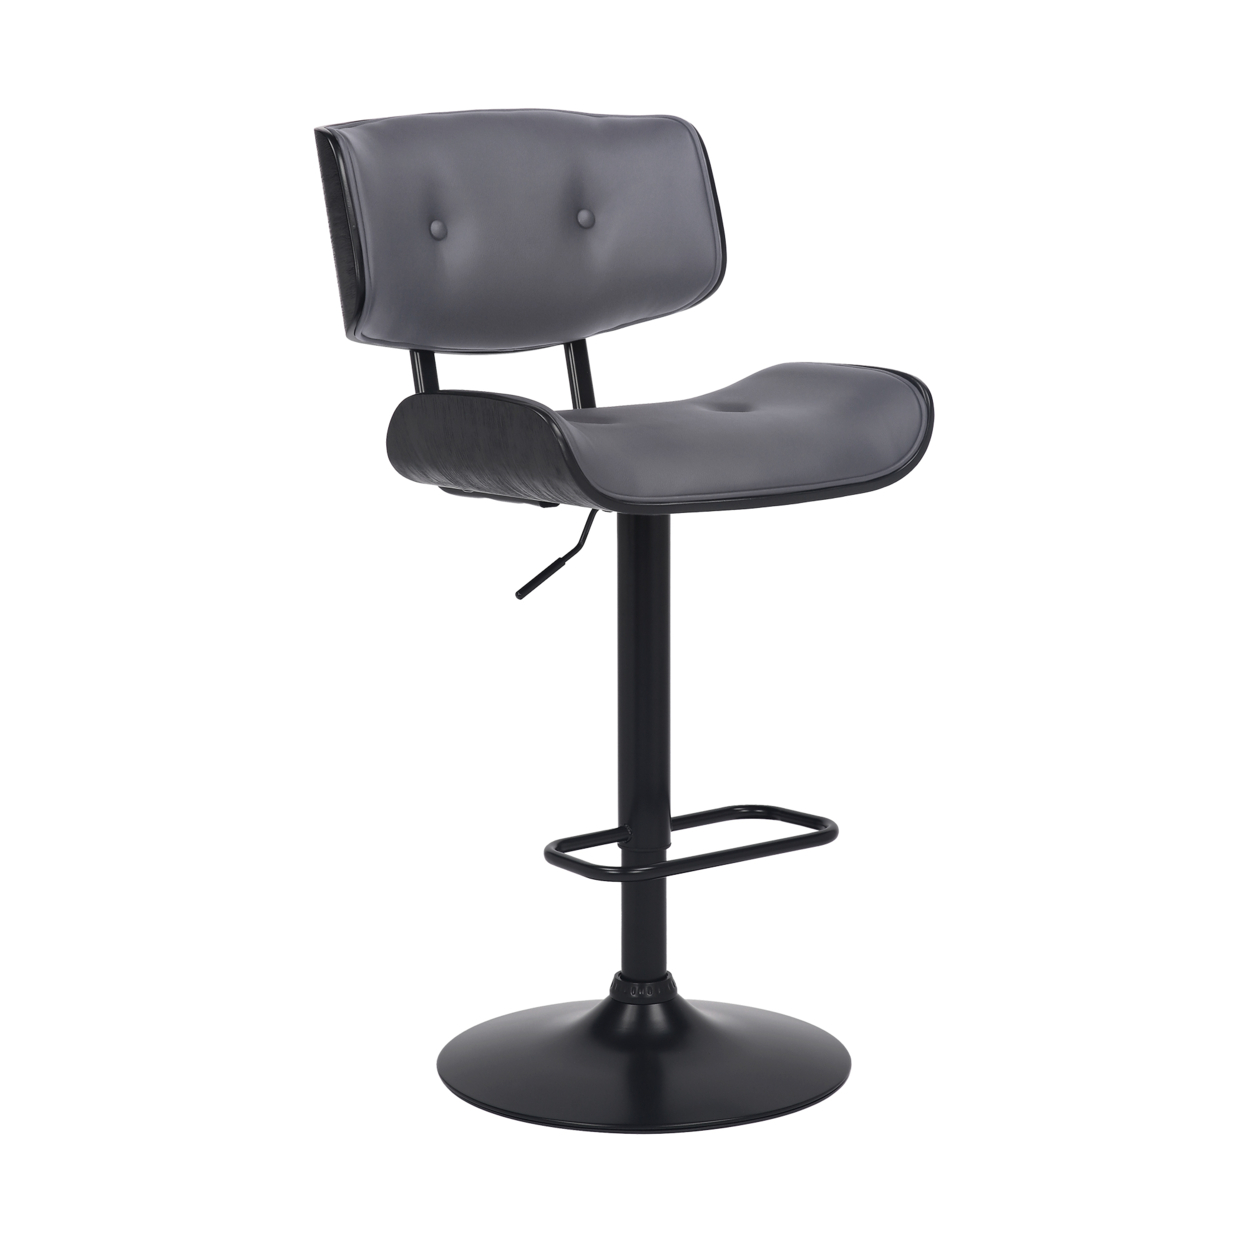 Bar Stool With Leatherette Button Tufted Back And Seat, Gray- Saltoro Sherpi